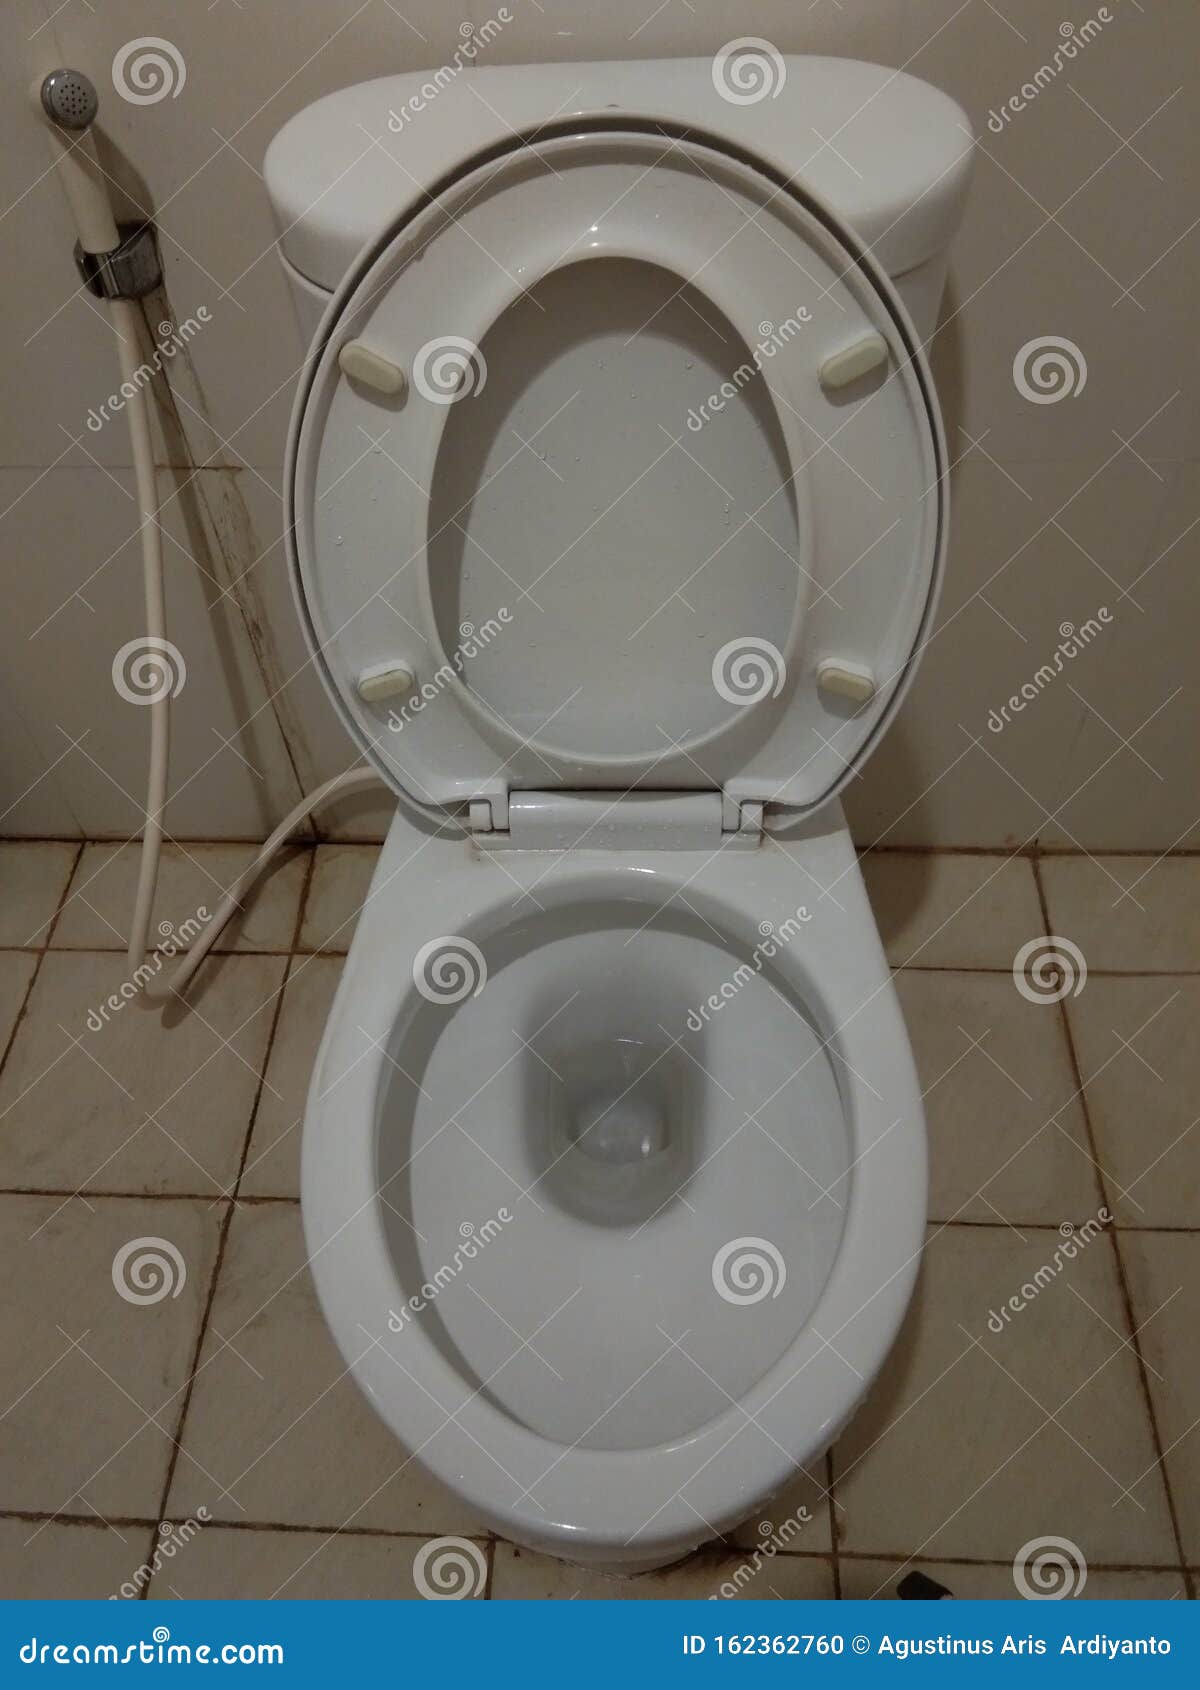 Image: Close-up of toilet with seat up - EWA Stock Photo 